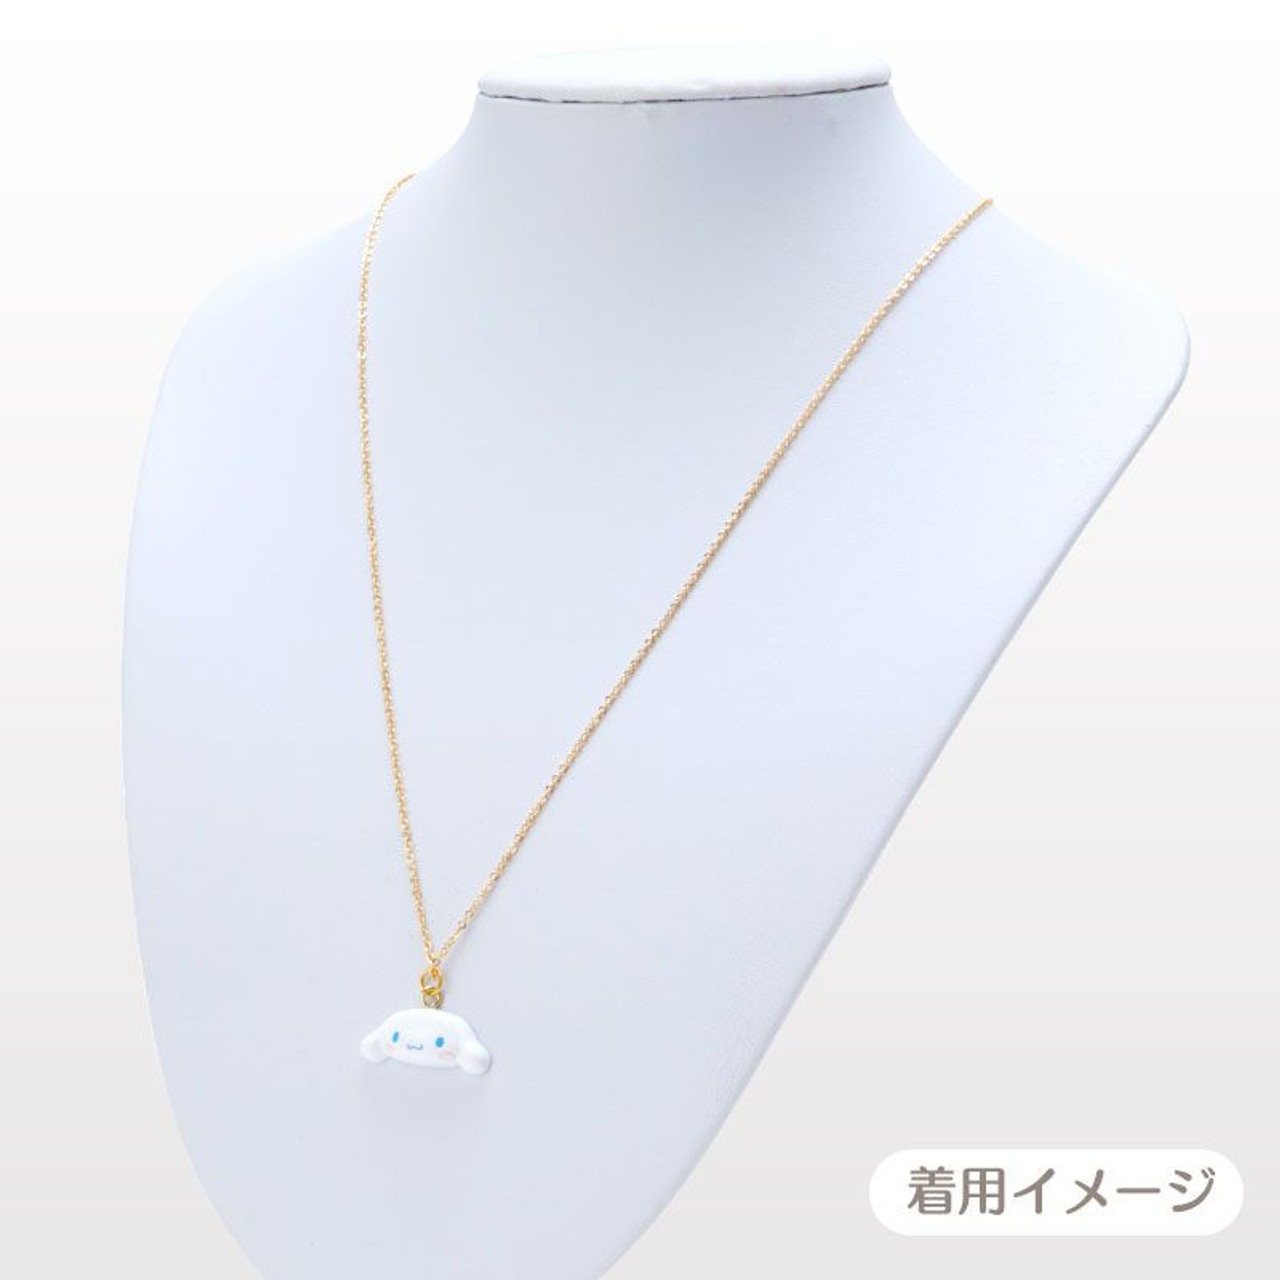 ❥ Cinnamoroll necklace 🥥, This is a cute necklace of